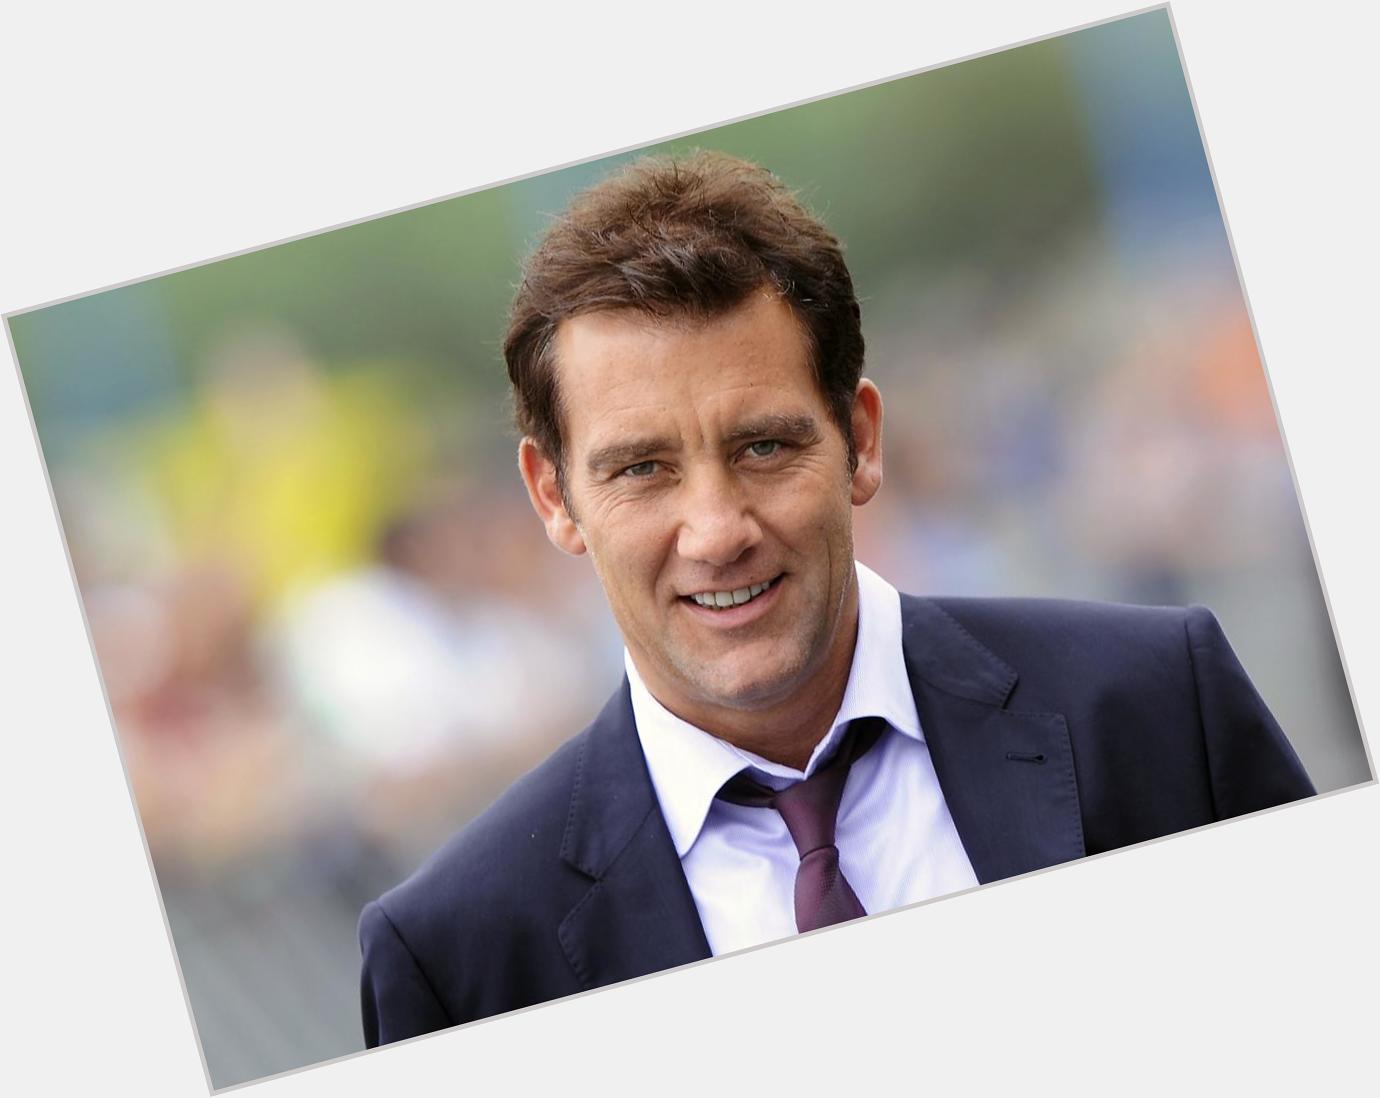 A very HAPPY BIRTHDAY to Clive Owen!  Do you have a favorite?  Children of Men, Croupier, or how about Sin City? 